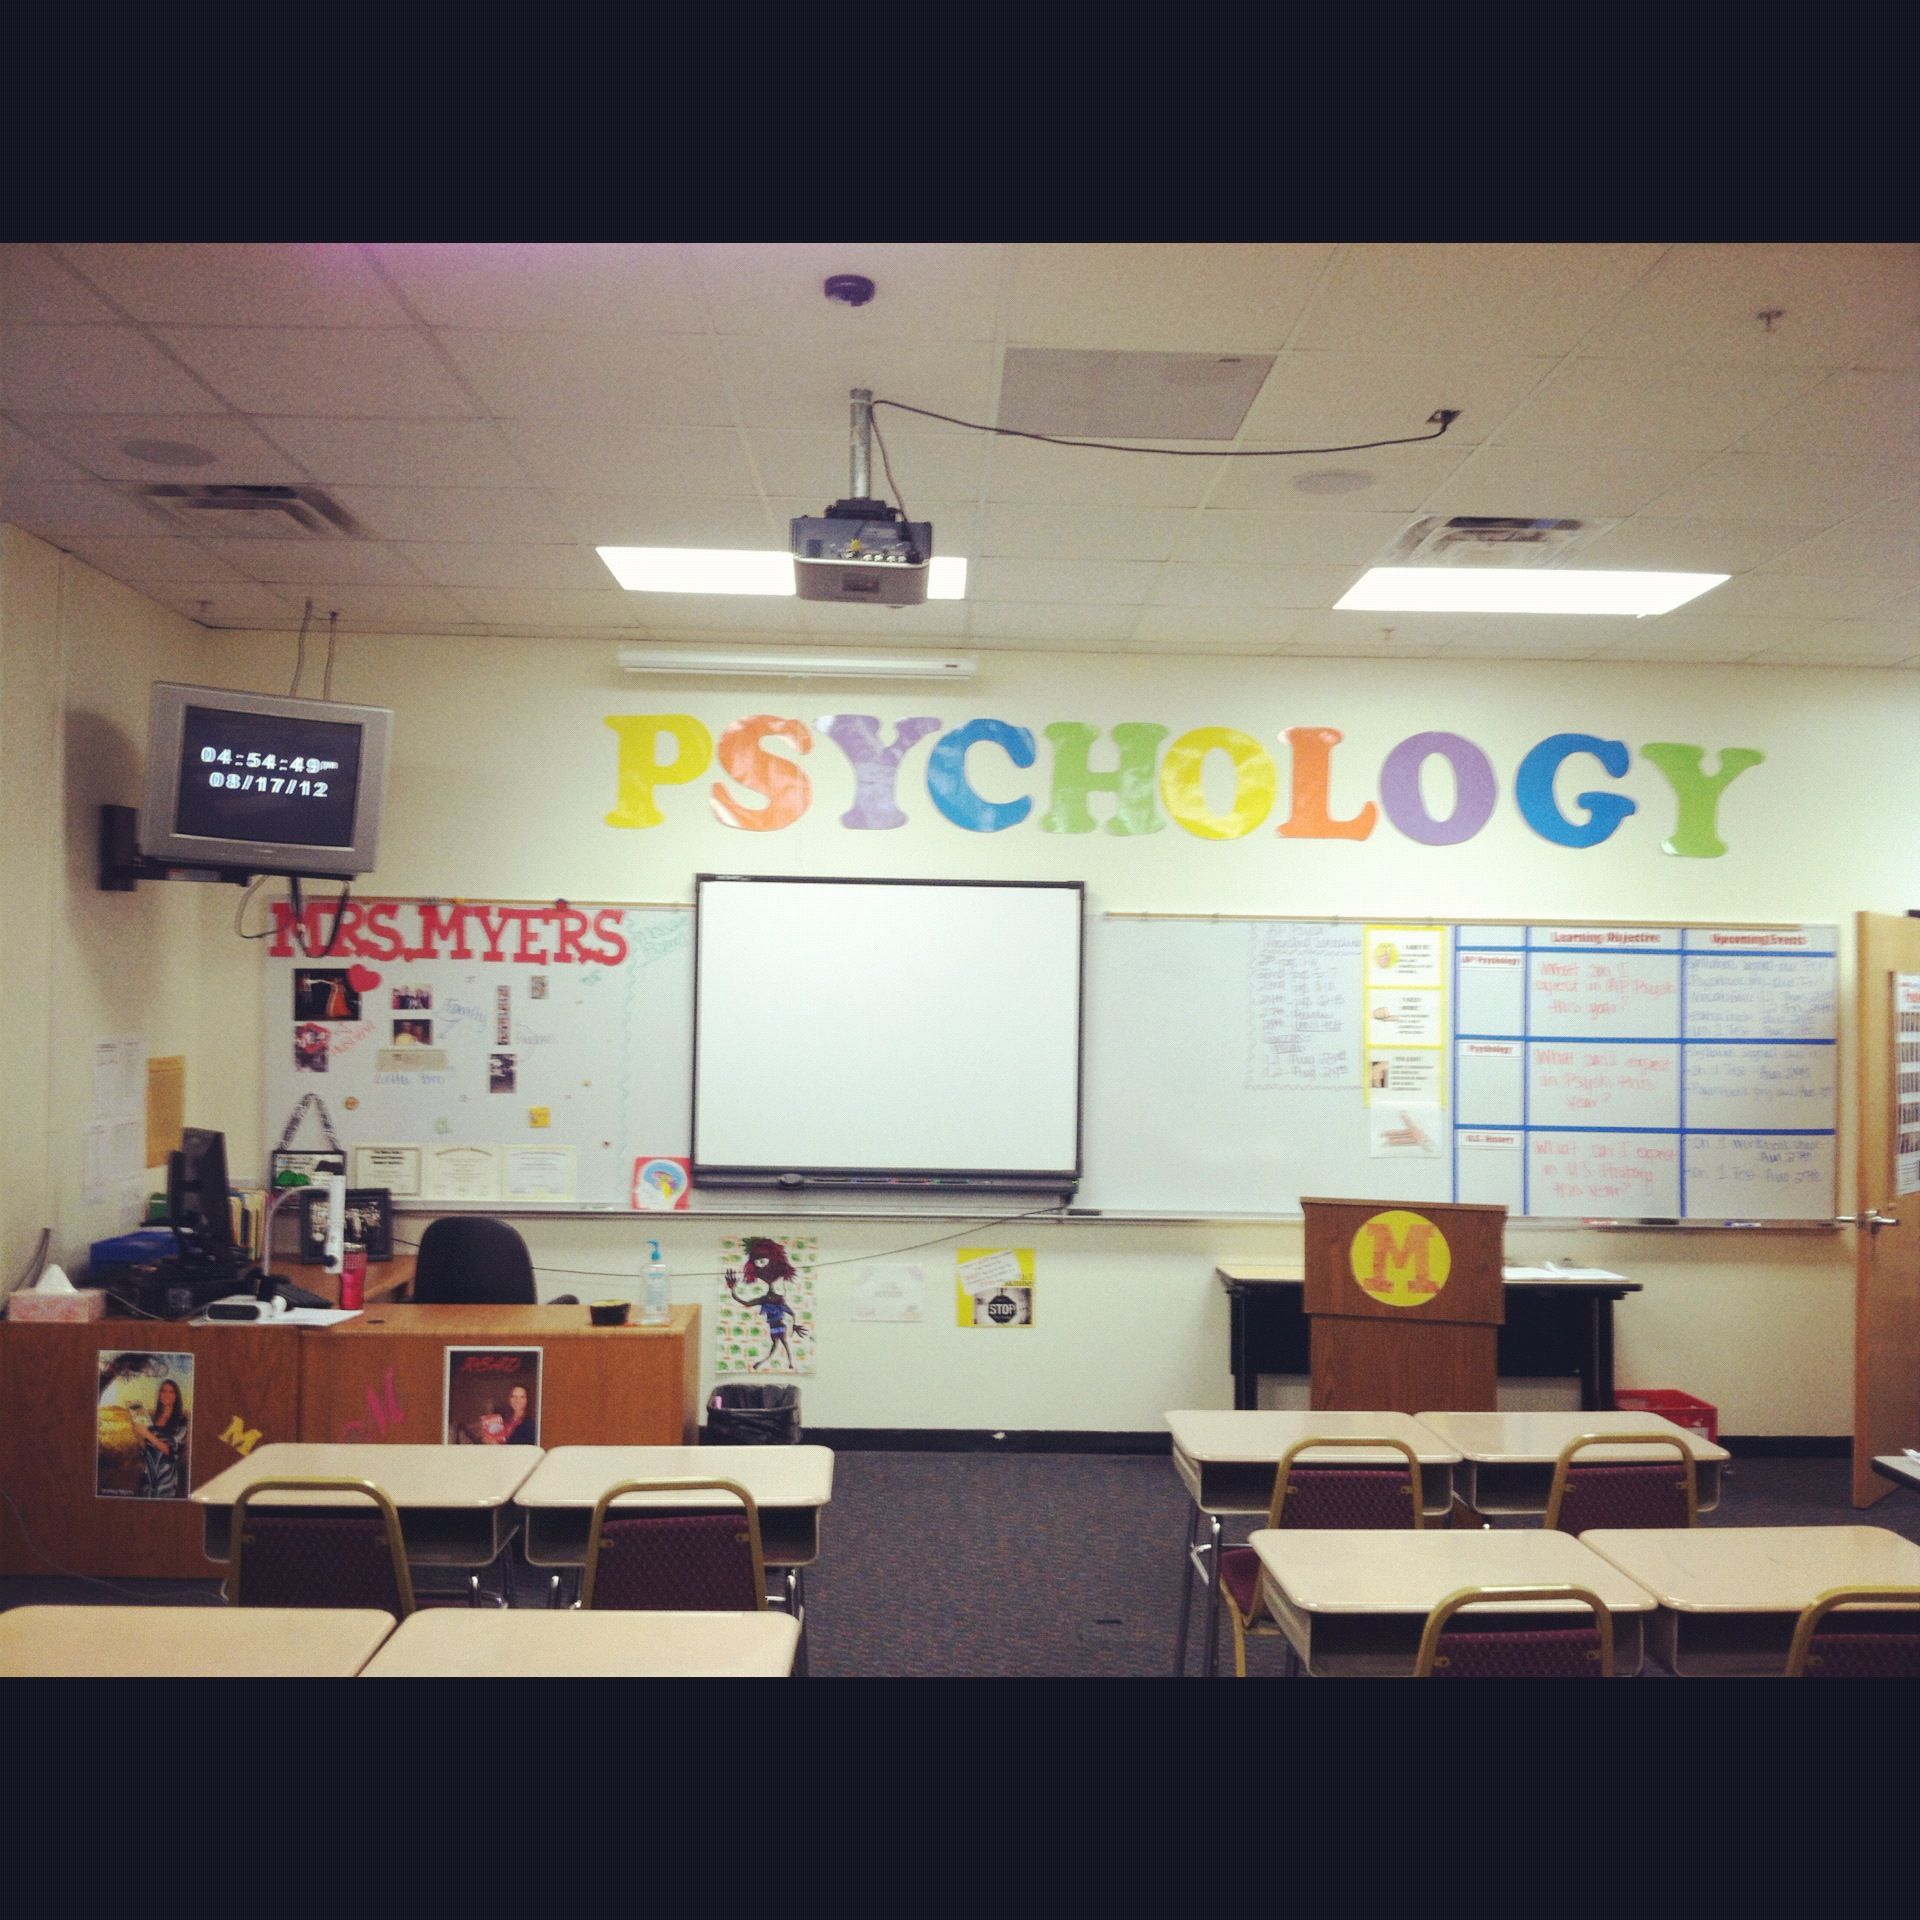 High school psychology classroom. The big letters up top were traced ...